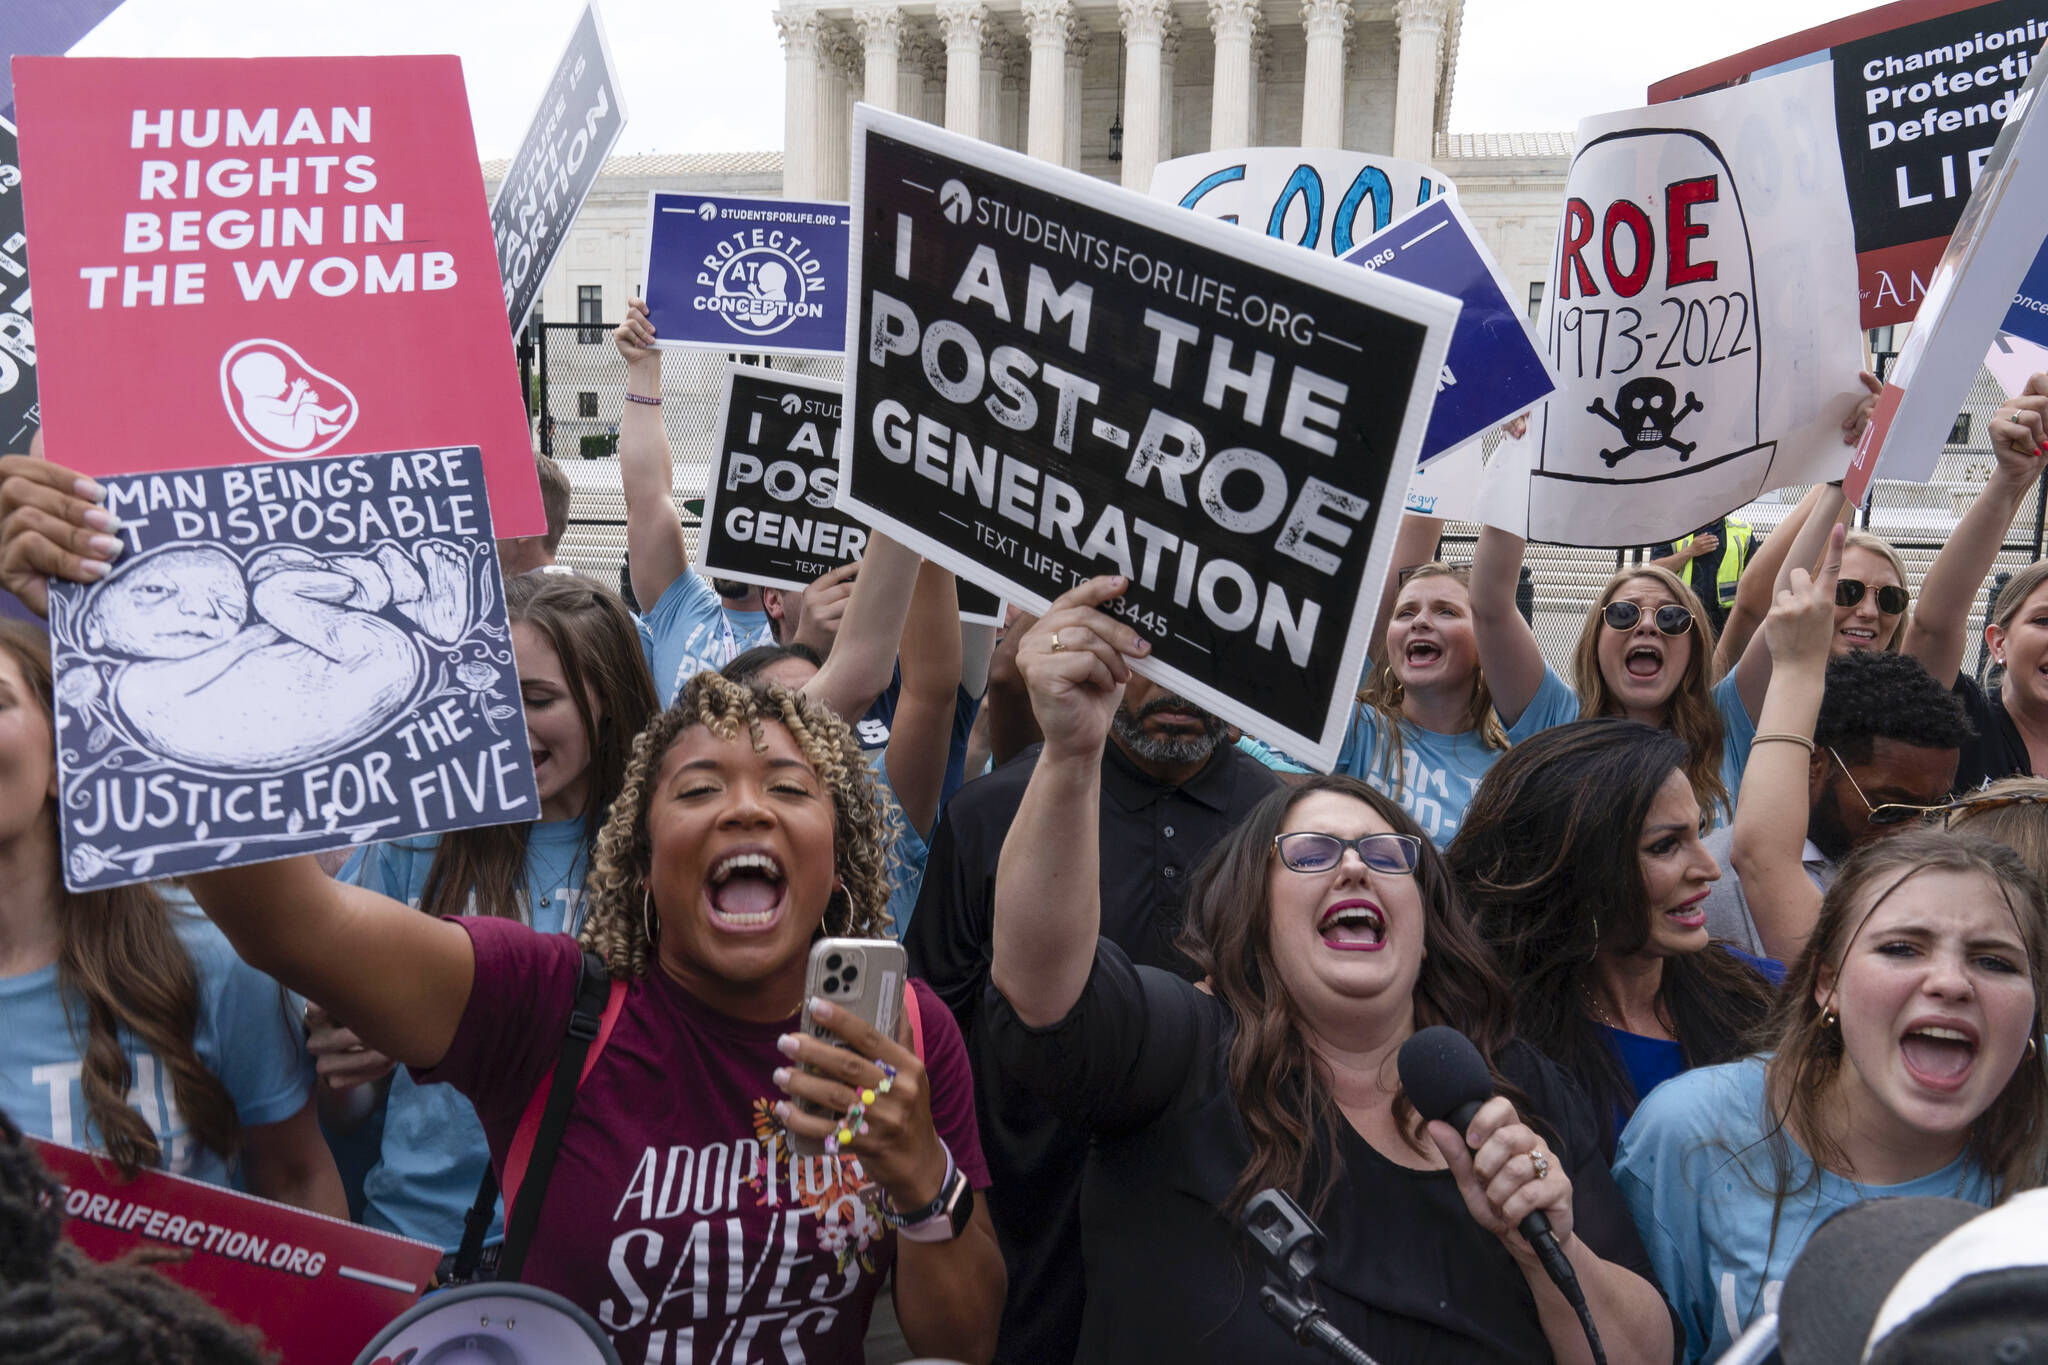 Demonstrators gather outside the Supreme Court in Washington, Friday, June 24, 2022. The Supreme Court has ended constitutional protections for abortion that had been in place nearly 50 years, a decision by its conservative majority to overturn the court's landmark abortion cases. (AP Photo / Jose Luis Magana)